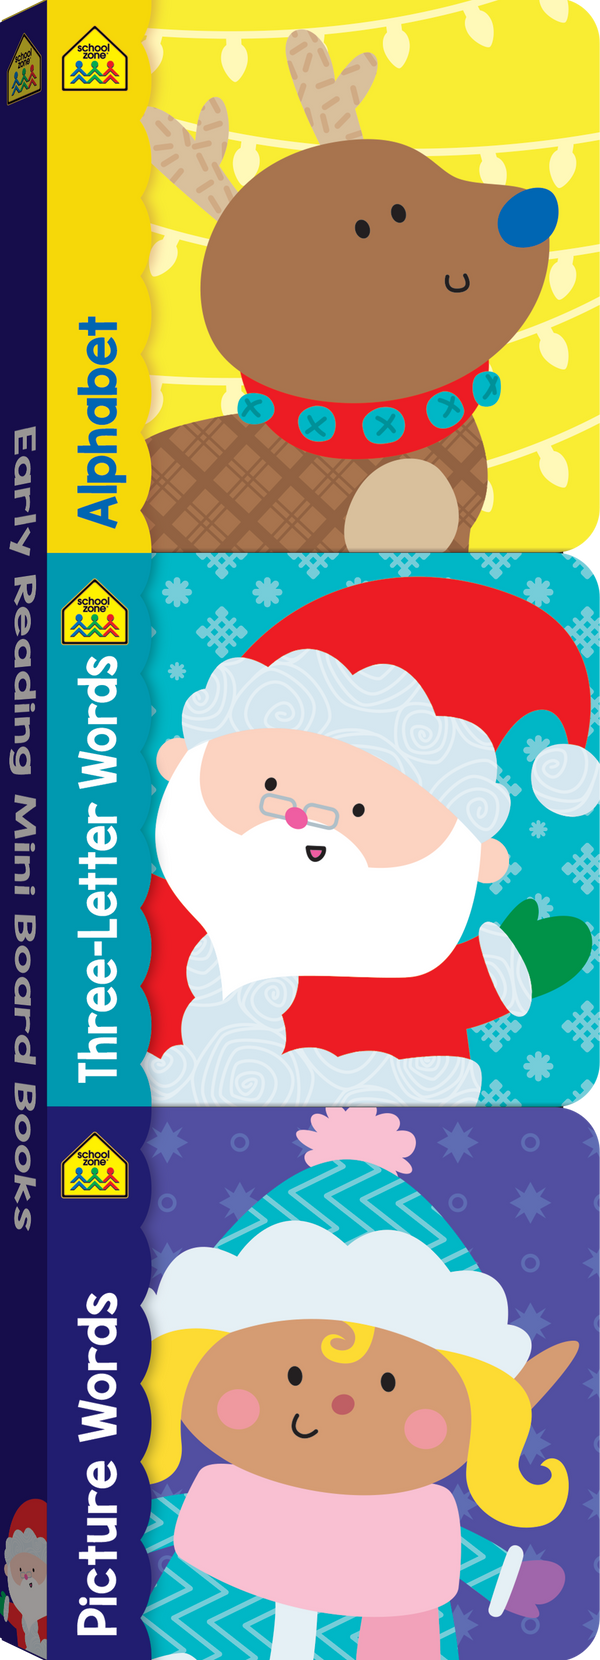 This trio of Early Reading Mini Board Books, including Alphabet, Three-Letter Words, and Picture Words, will make a super stocking stuffer!